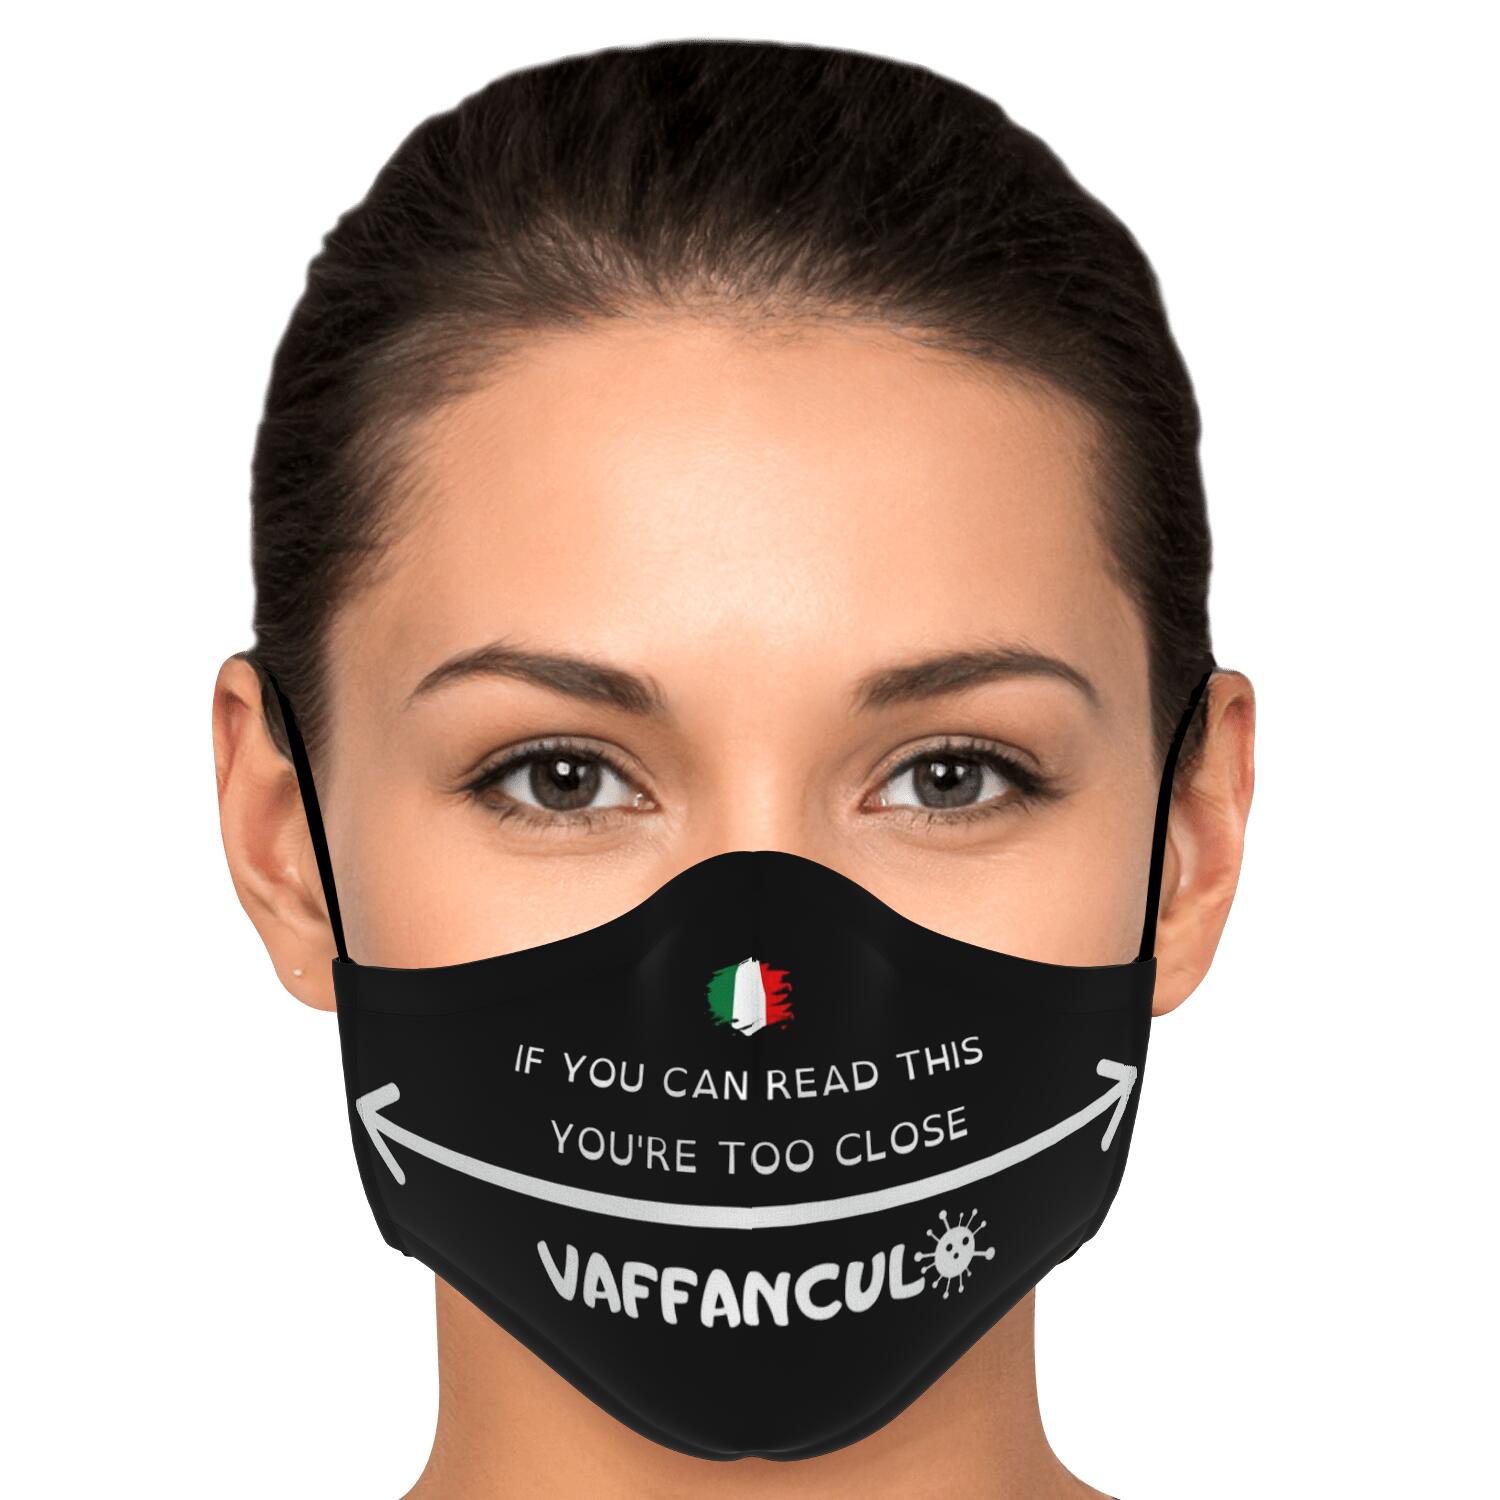 Vaffanculo Virus You're Too Close Face Mask + 2 PM 2.5 Filters